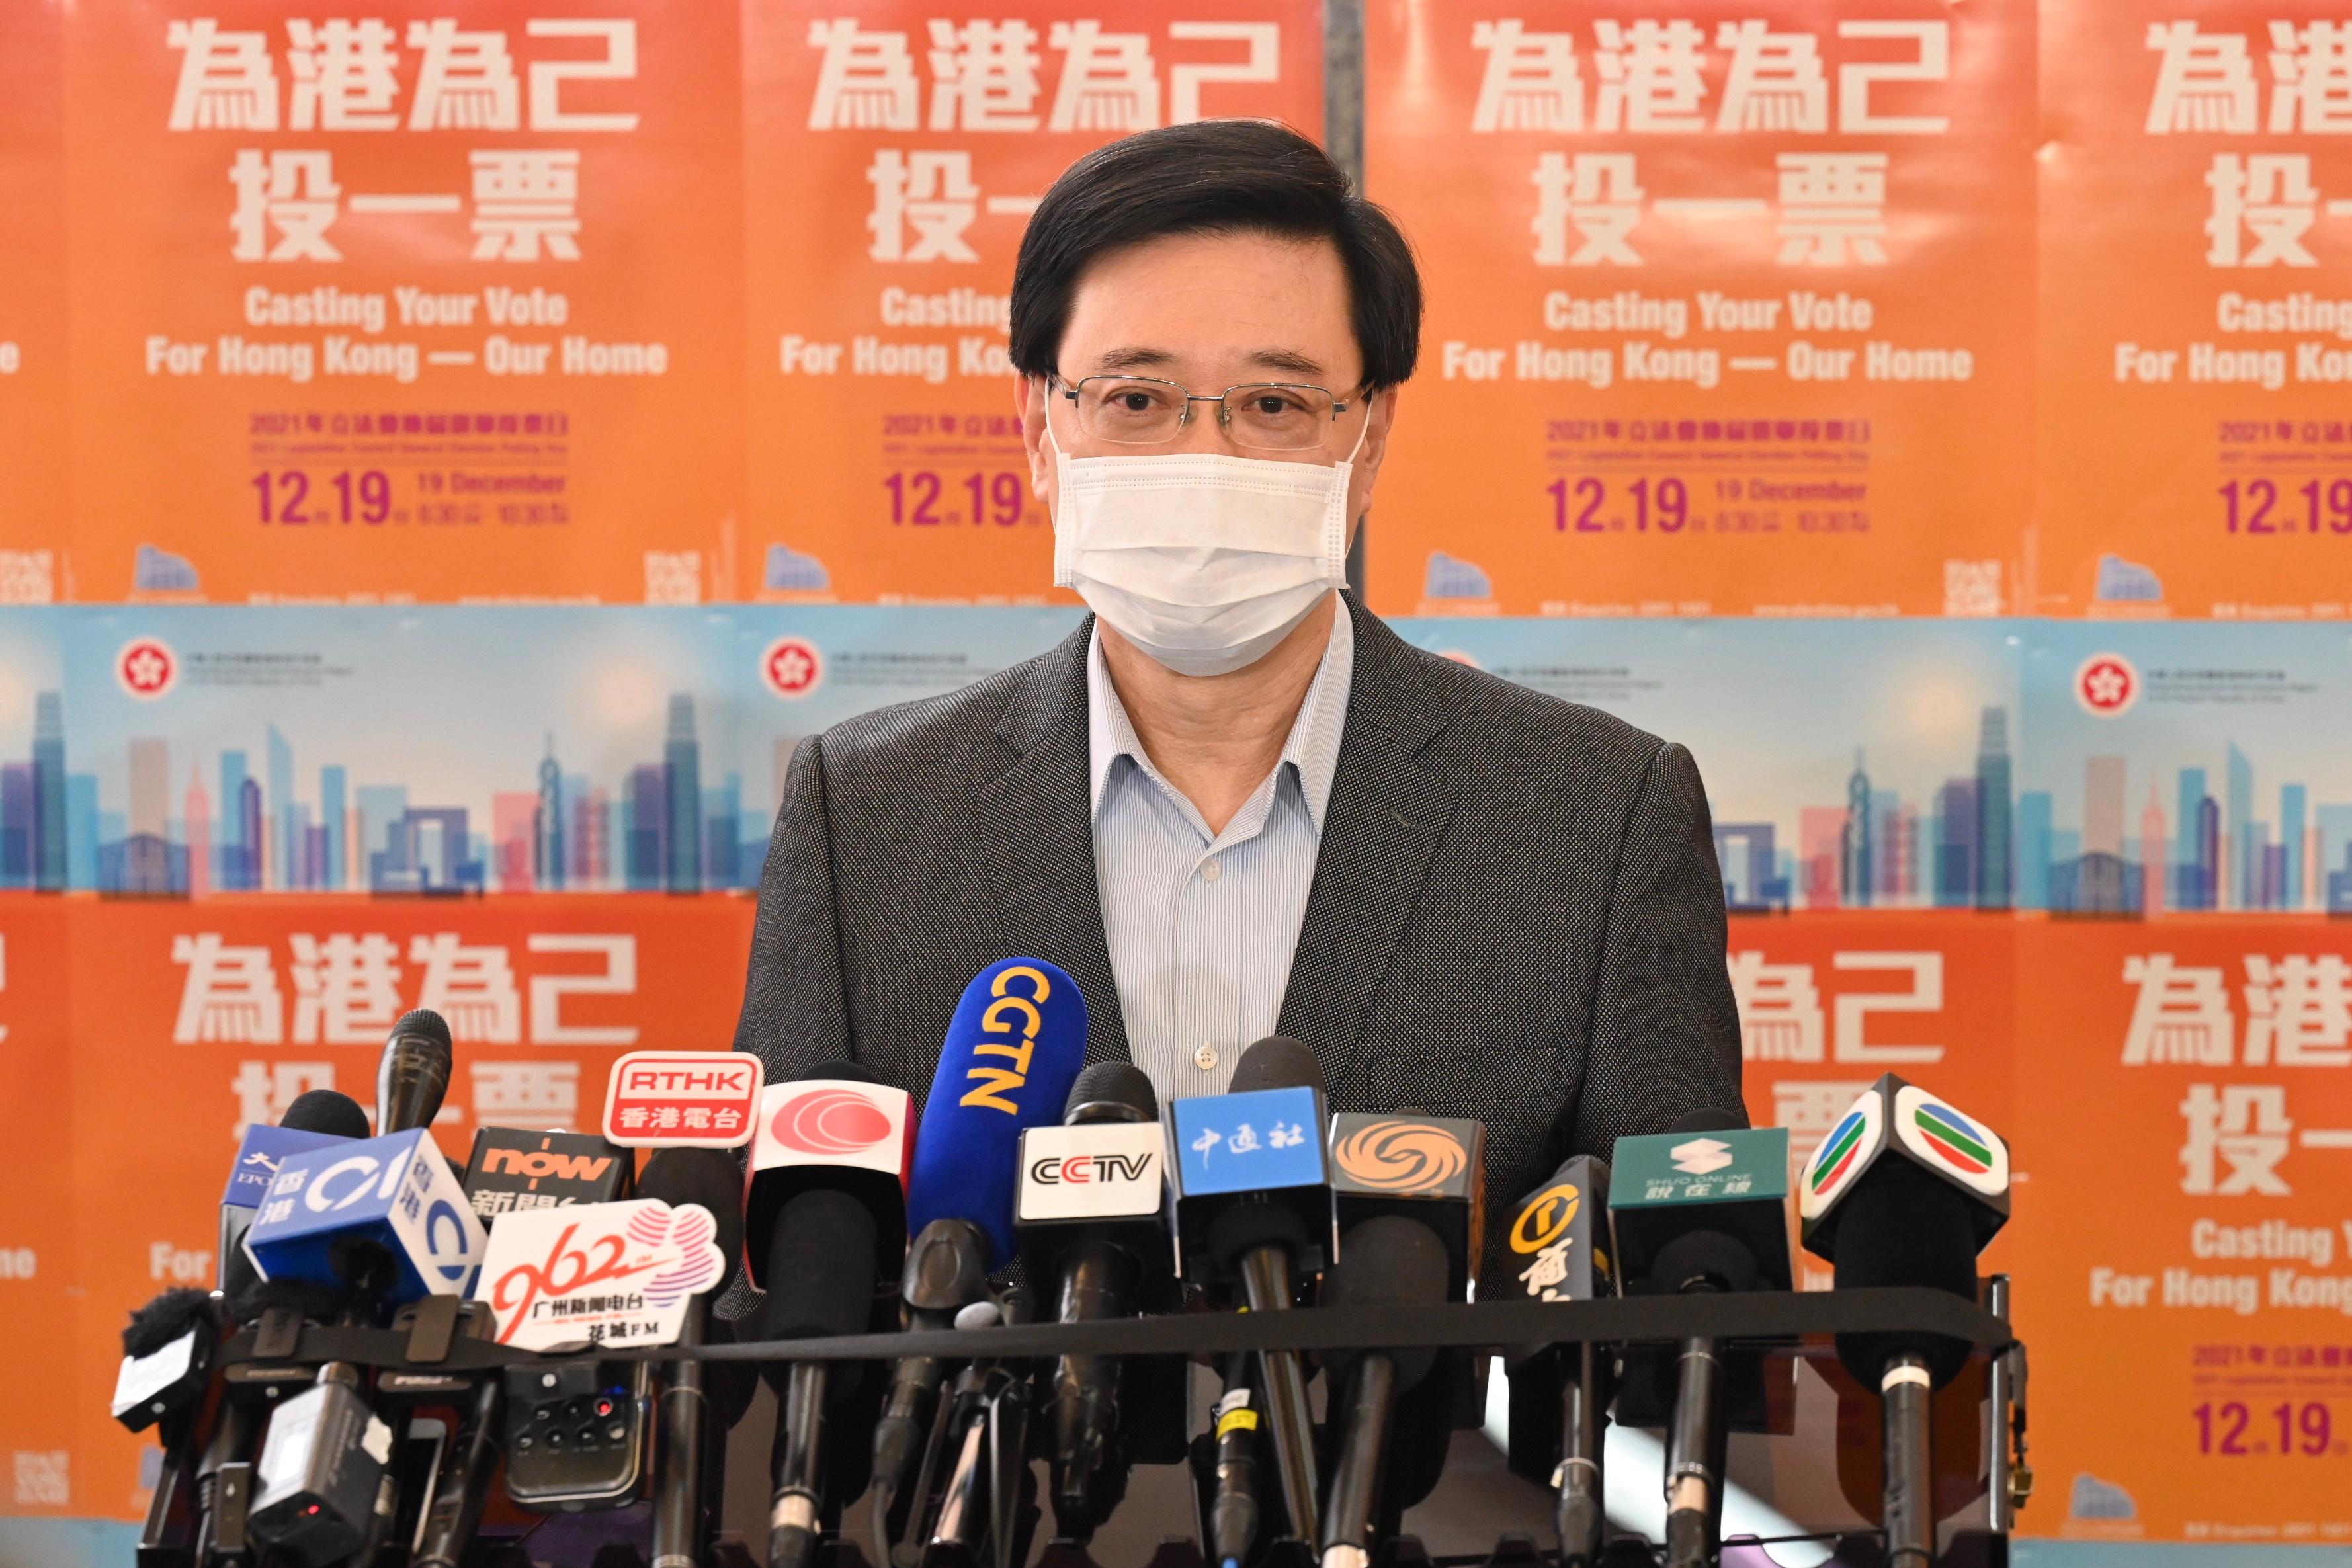 The Chief Secretary for Administration, Mr John Lee, cast his vote in the 2021 Legislative Council General Election at Yaumati Kaifong Association School this morning (December 19). Photo shows Mr Lee meeting the media after casting his vote.